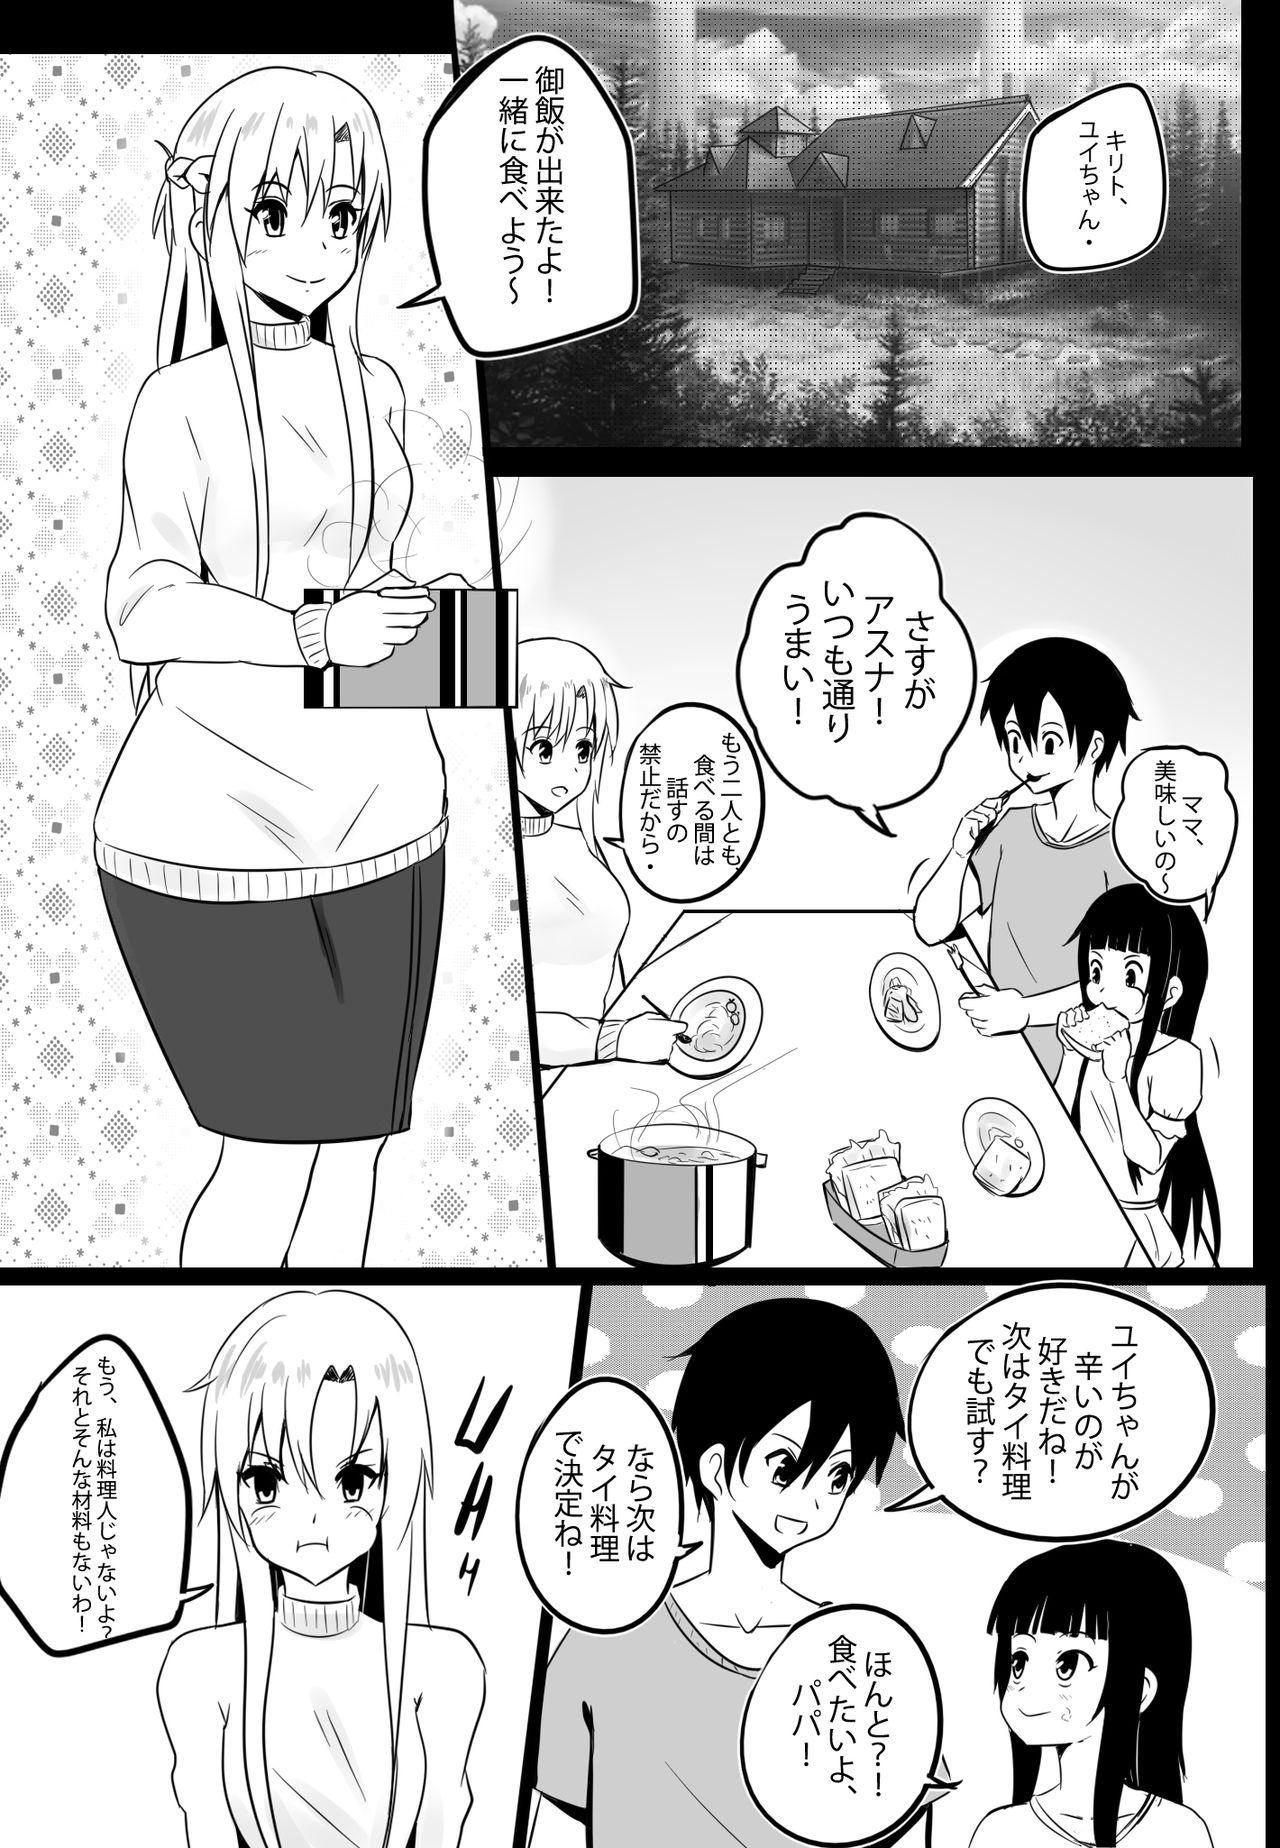 Hoe B-Trayal 19 - Sword art online Toying - Page 3